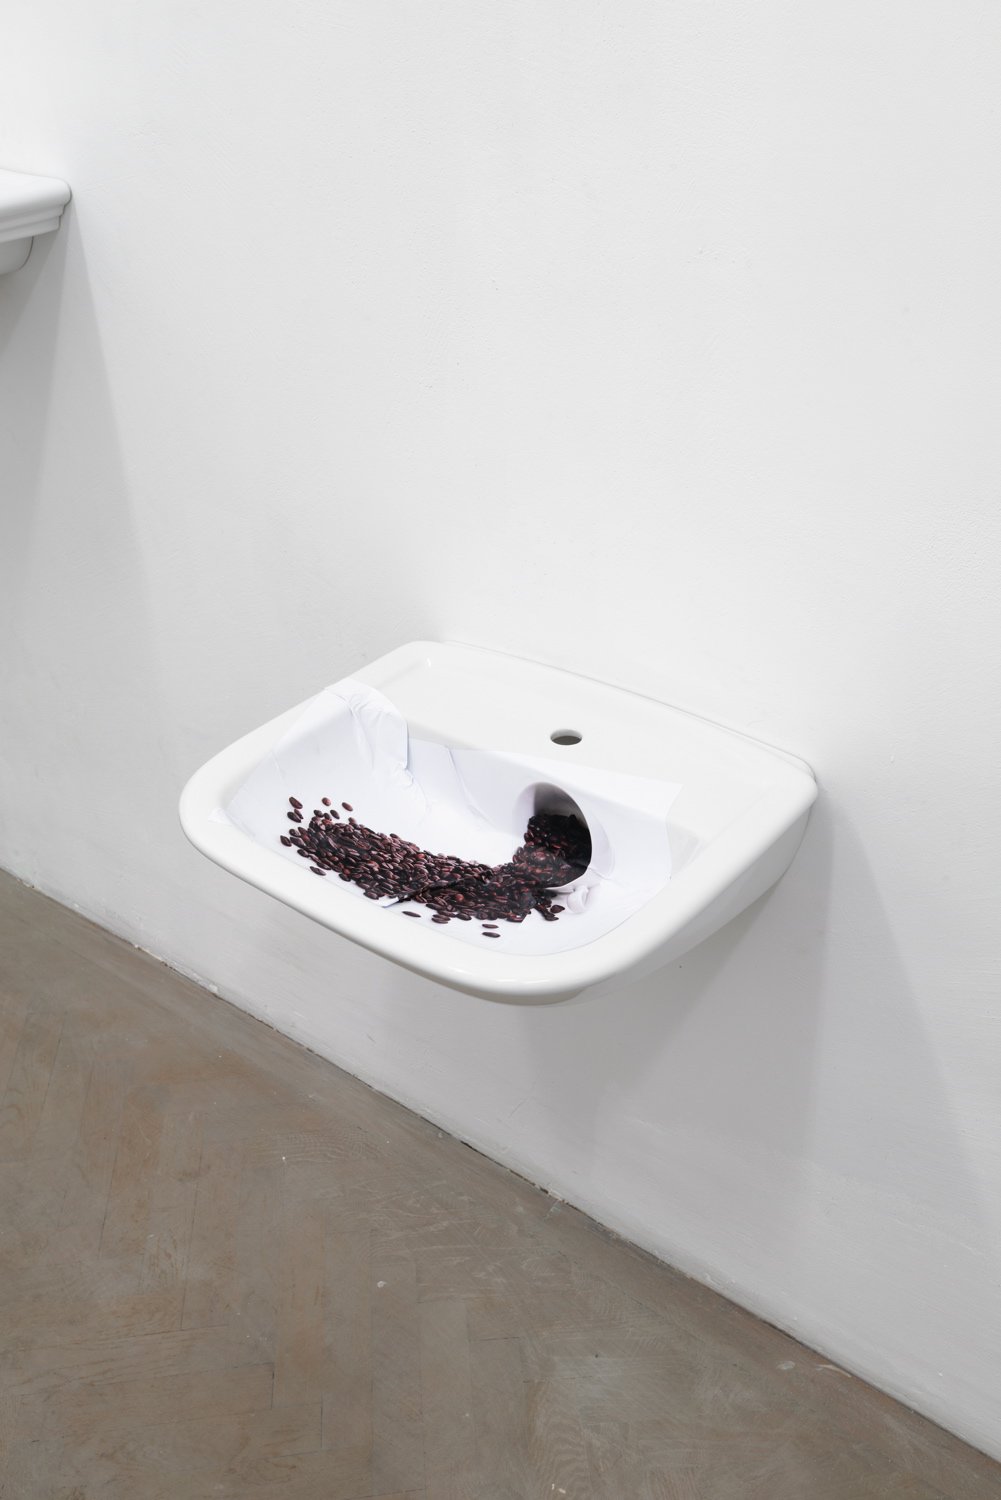 Nina BeierThe Demonstraters (Solid Coffee Spill), 2014Porcelain sink and paper53 x 60 x 22 cm